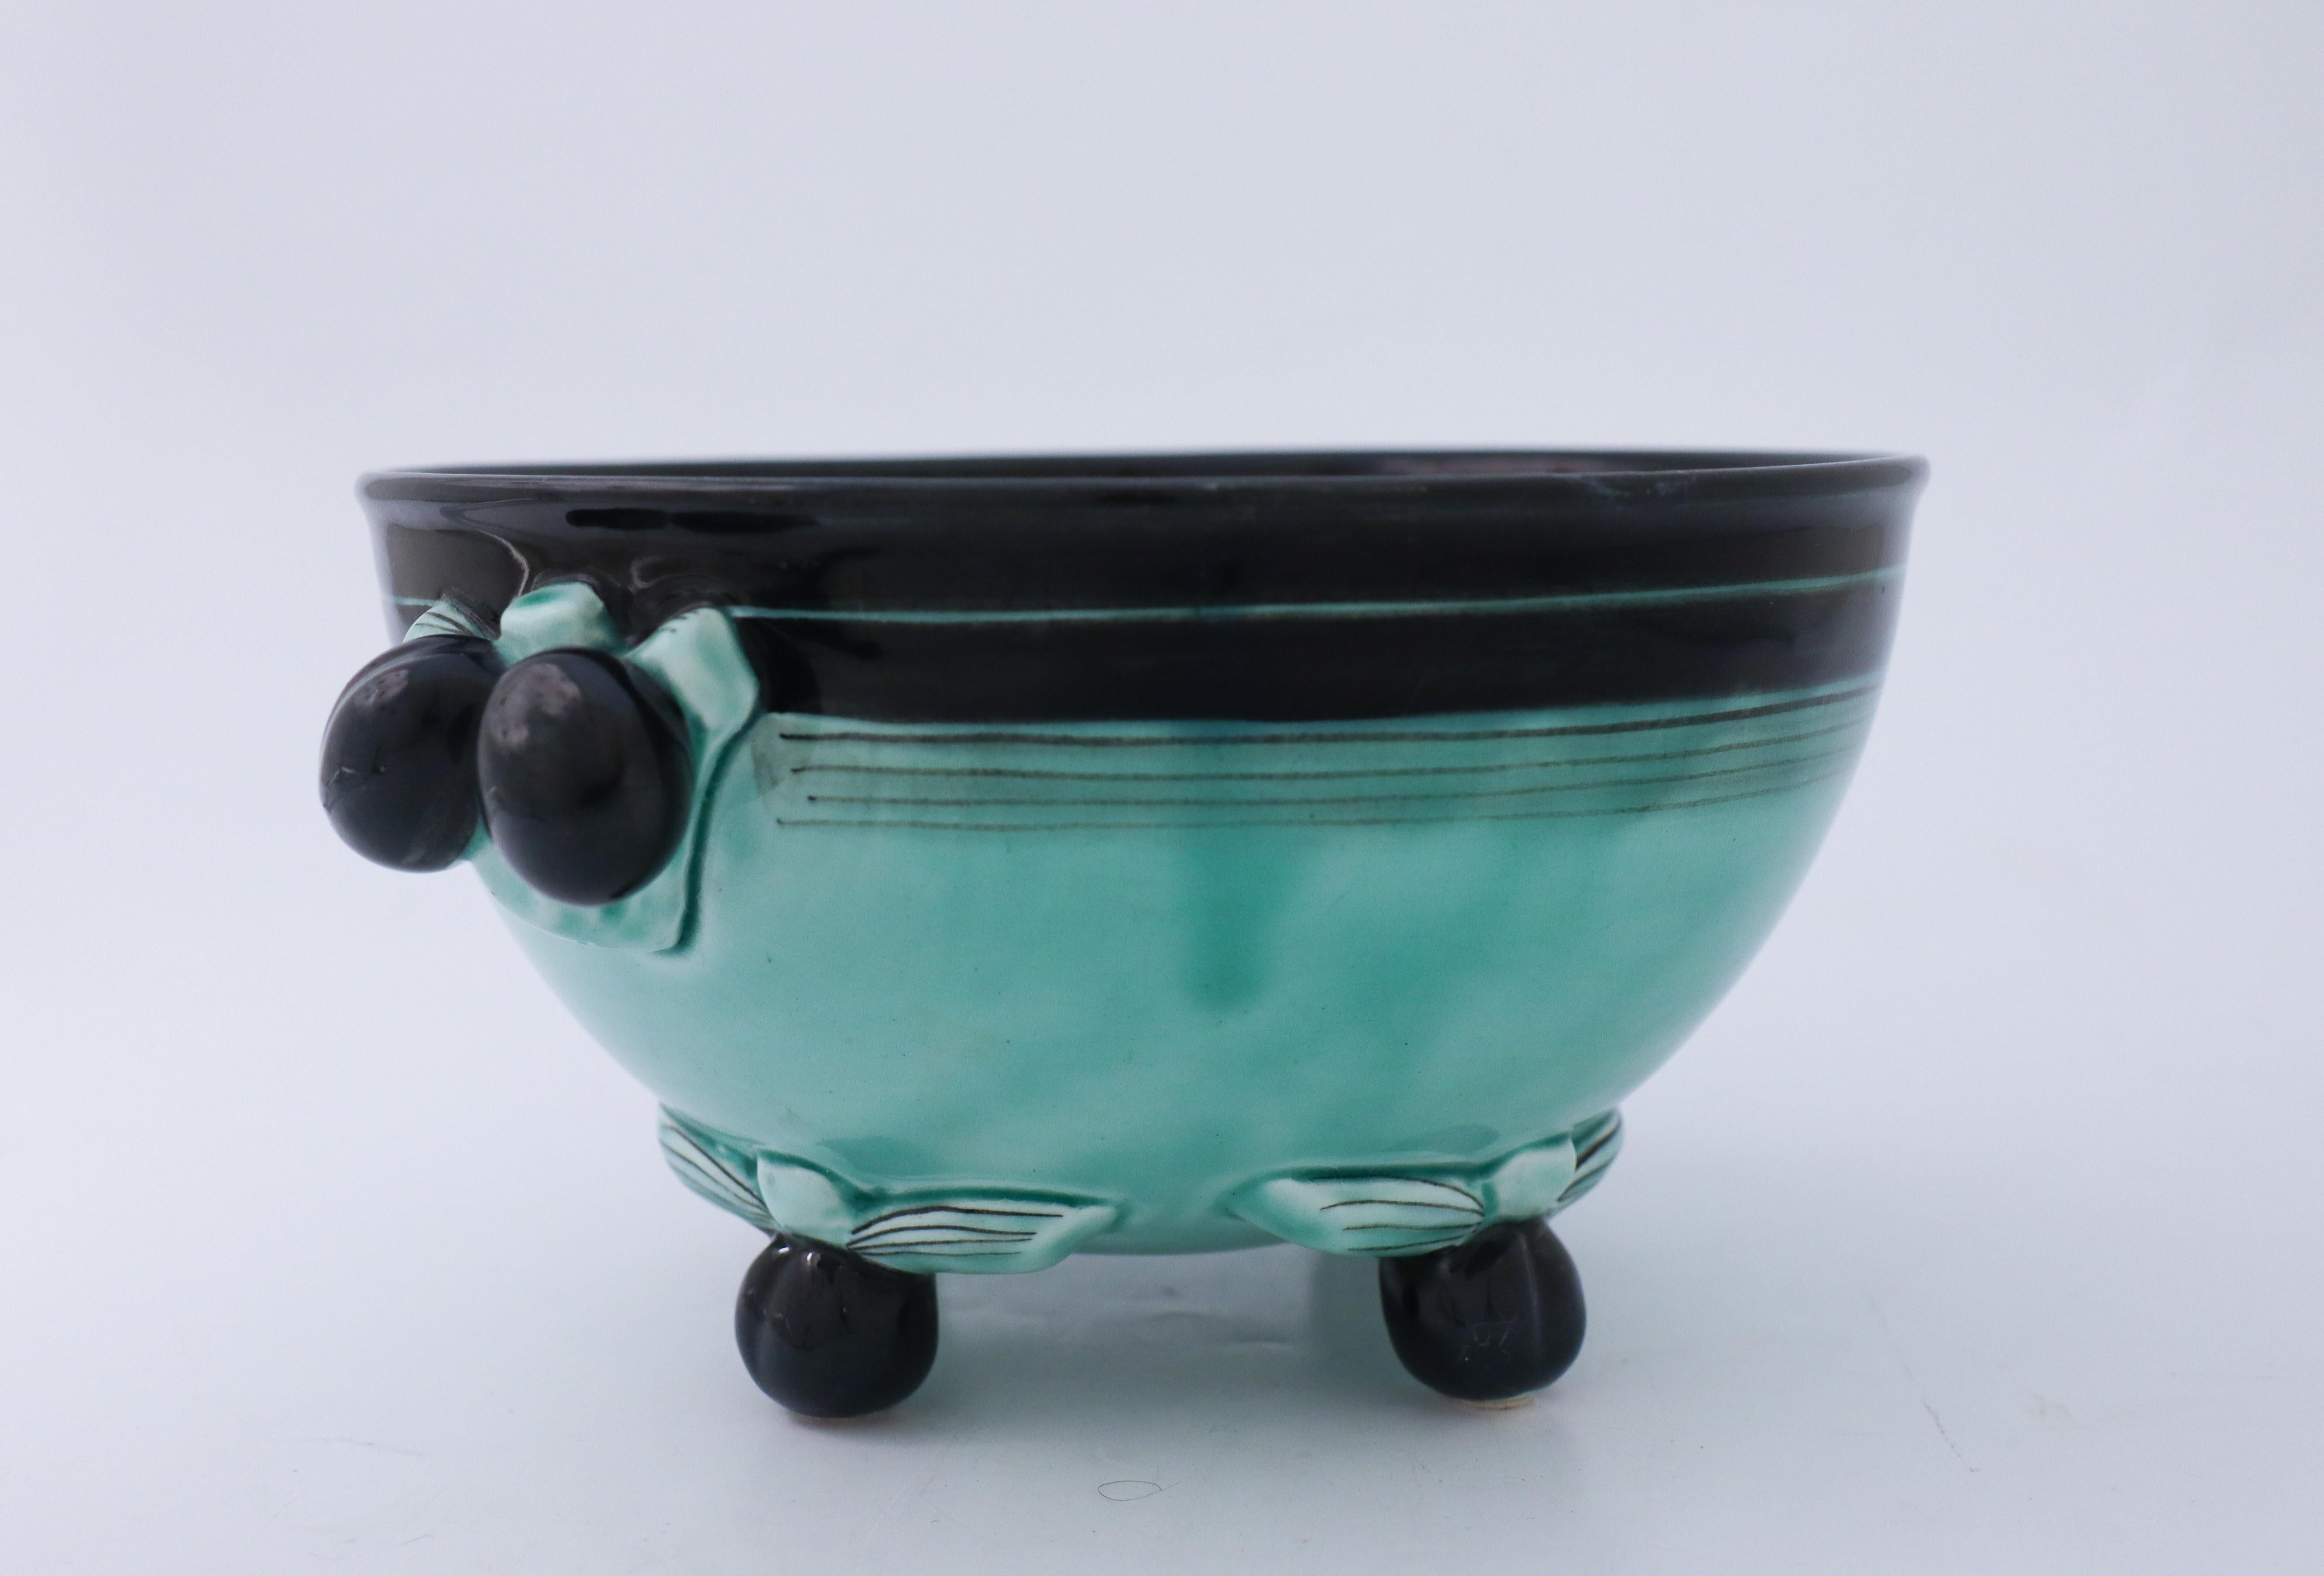 A lovely bowl designed by Ilse Claesson in the 1930s at Rörstrand, Sweden. It is 23,5 cm in diameter and about 11,5 cm high and in very good condition except from some craquelure in the glaze because of the age. This is an iconic Art Deco bowl.